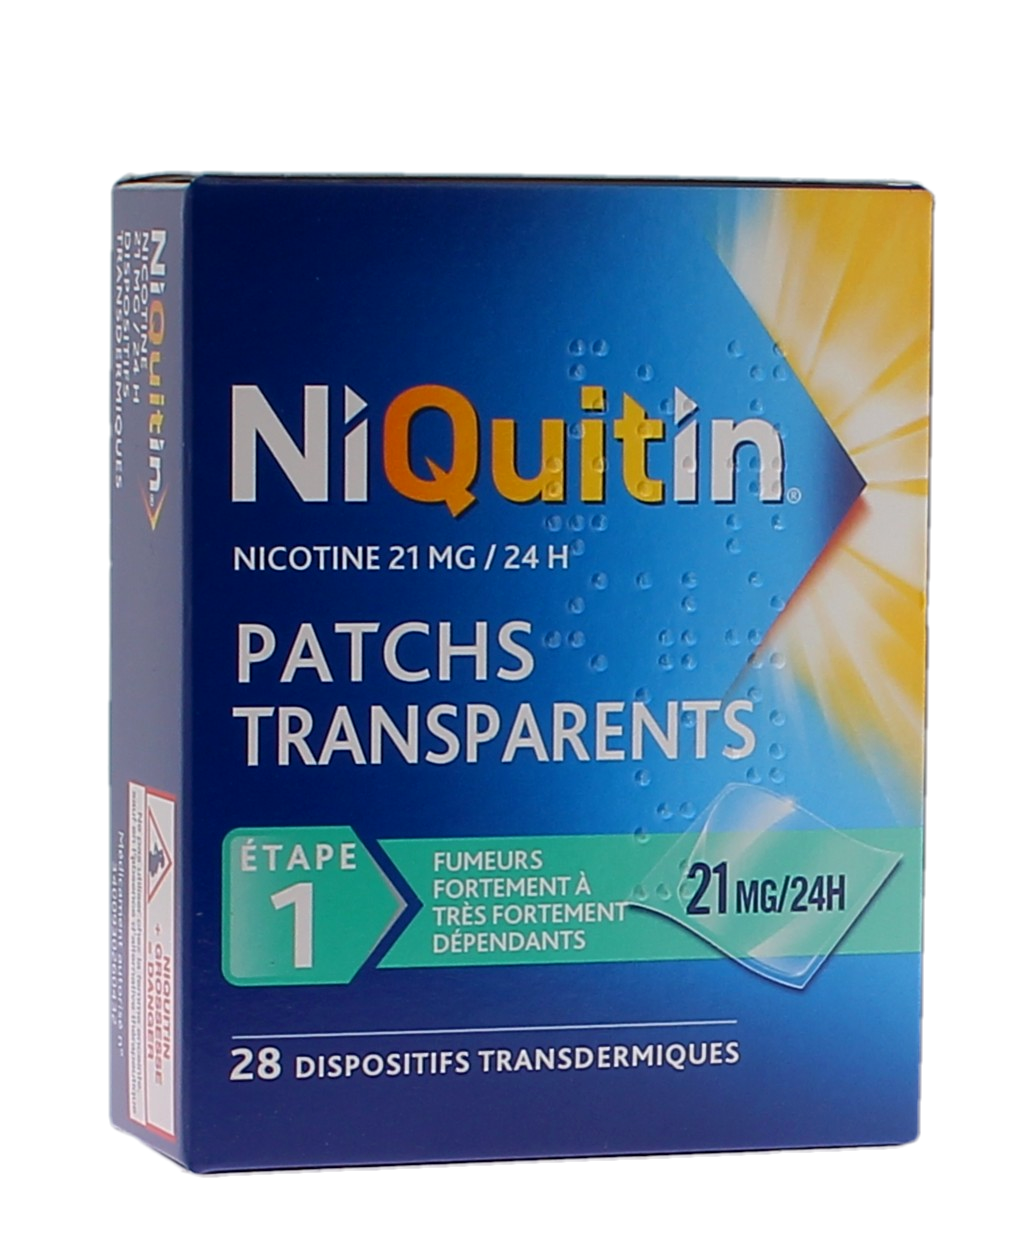 Niquitin 21mg/24h - 28 patchs